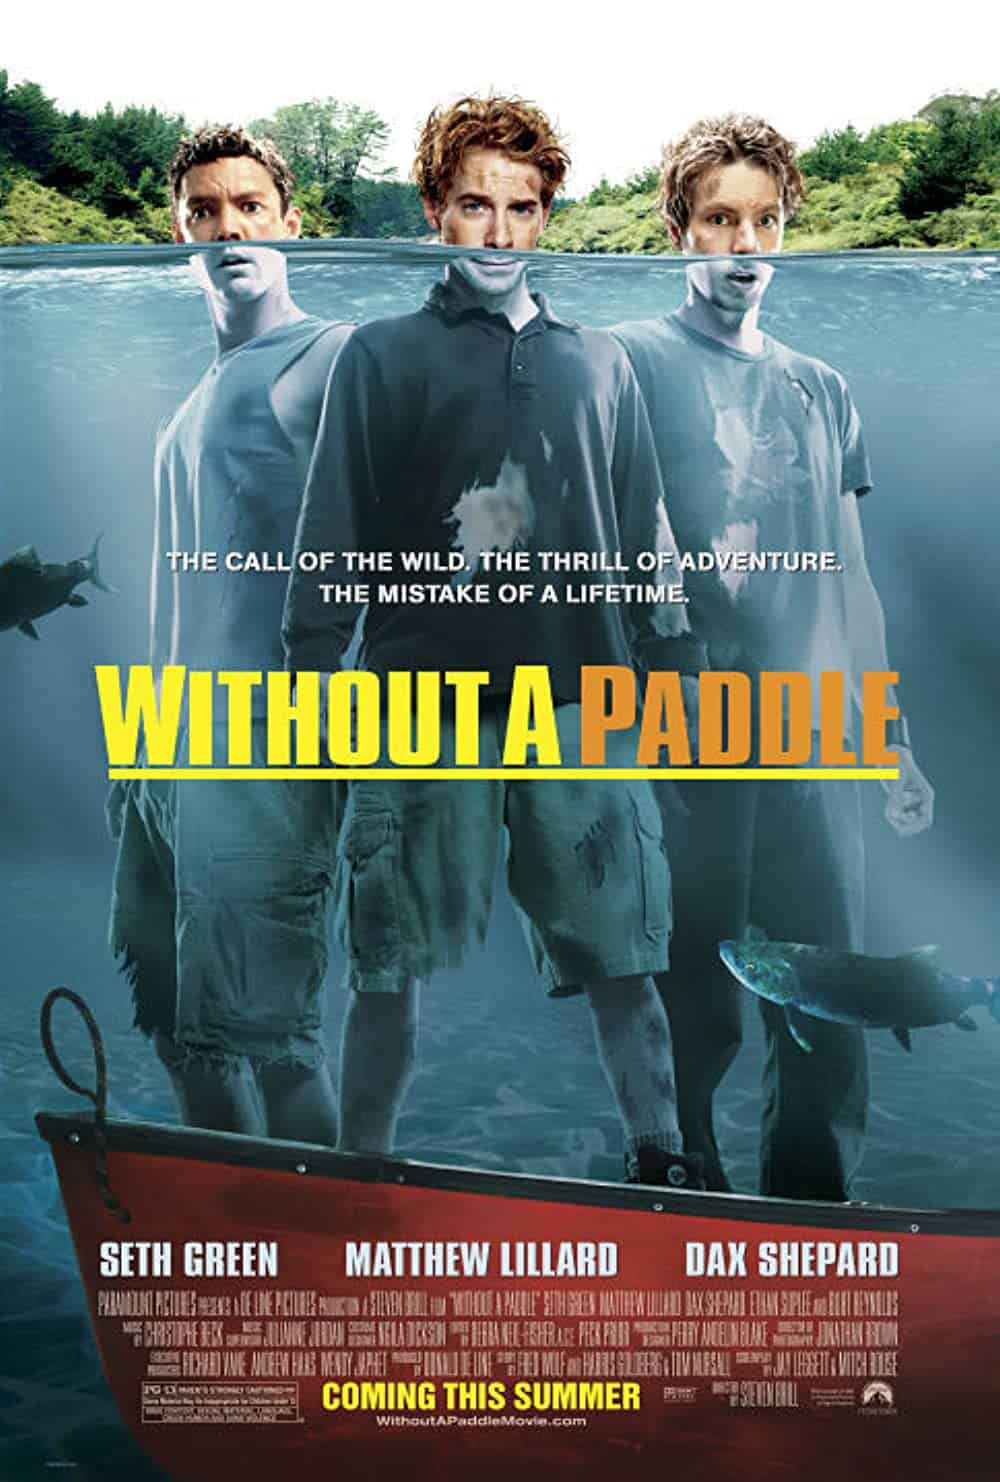 Camping Movies Without A Paddle (2004)